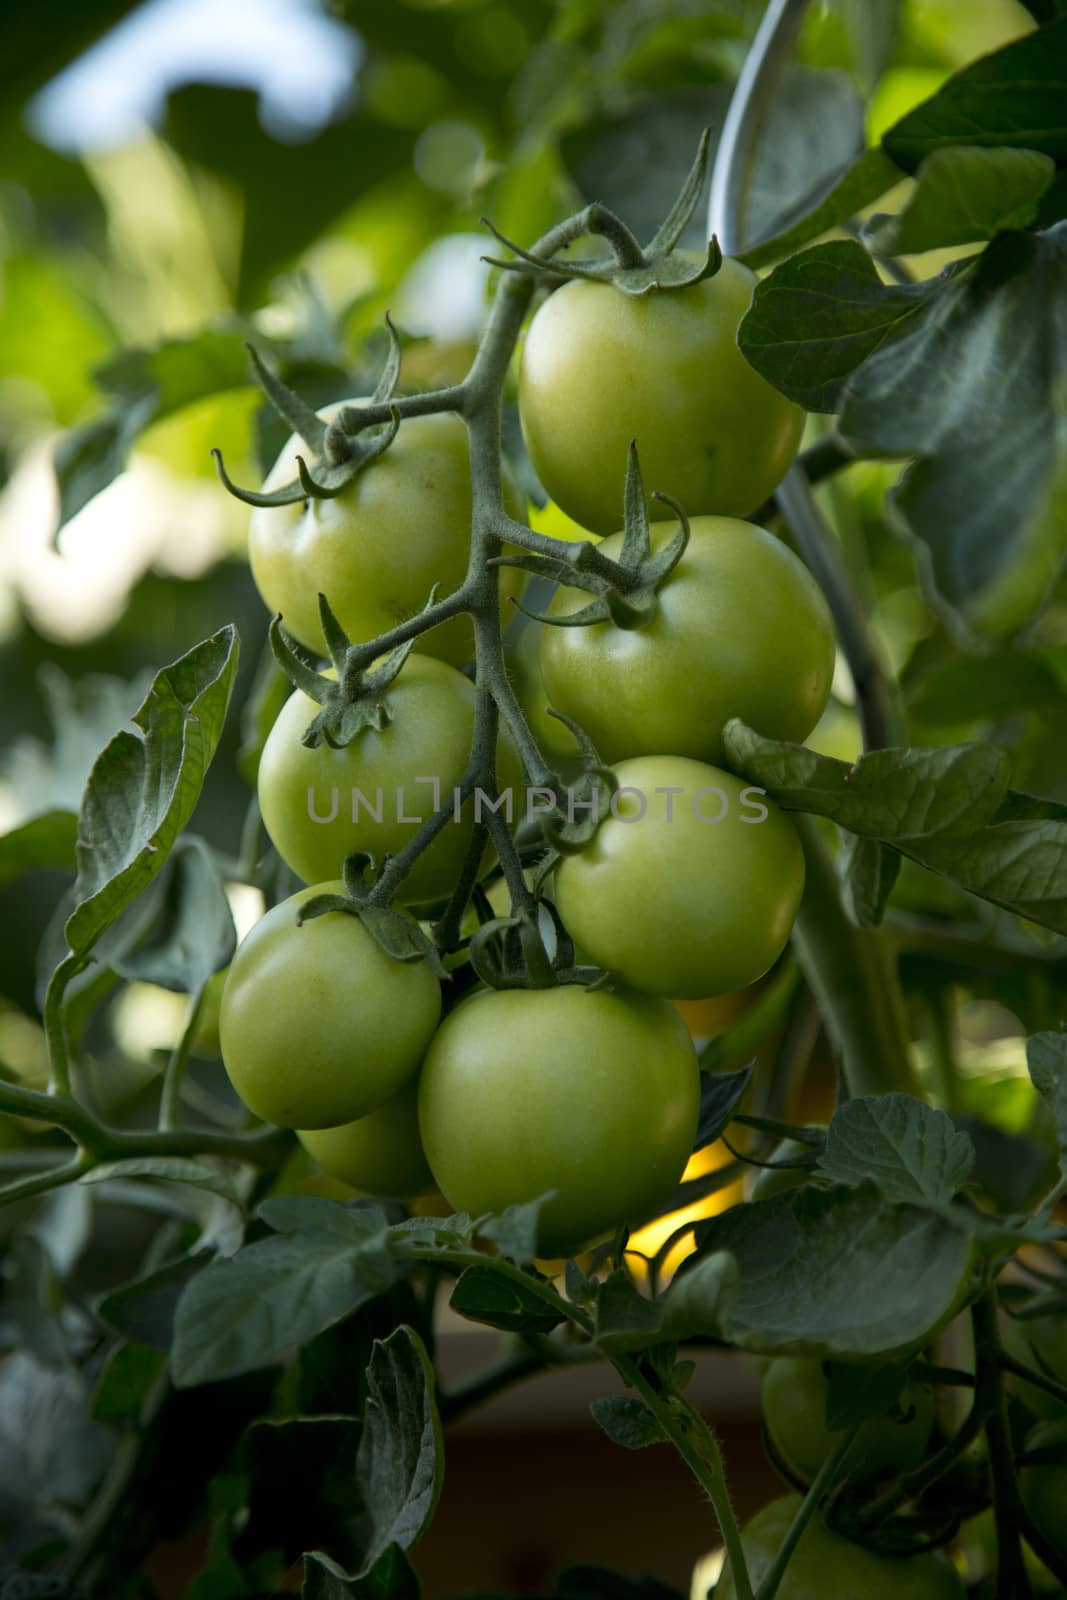 Bunch of tomatoes - 02 by Kartouchken